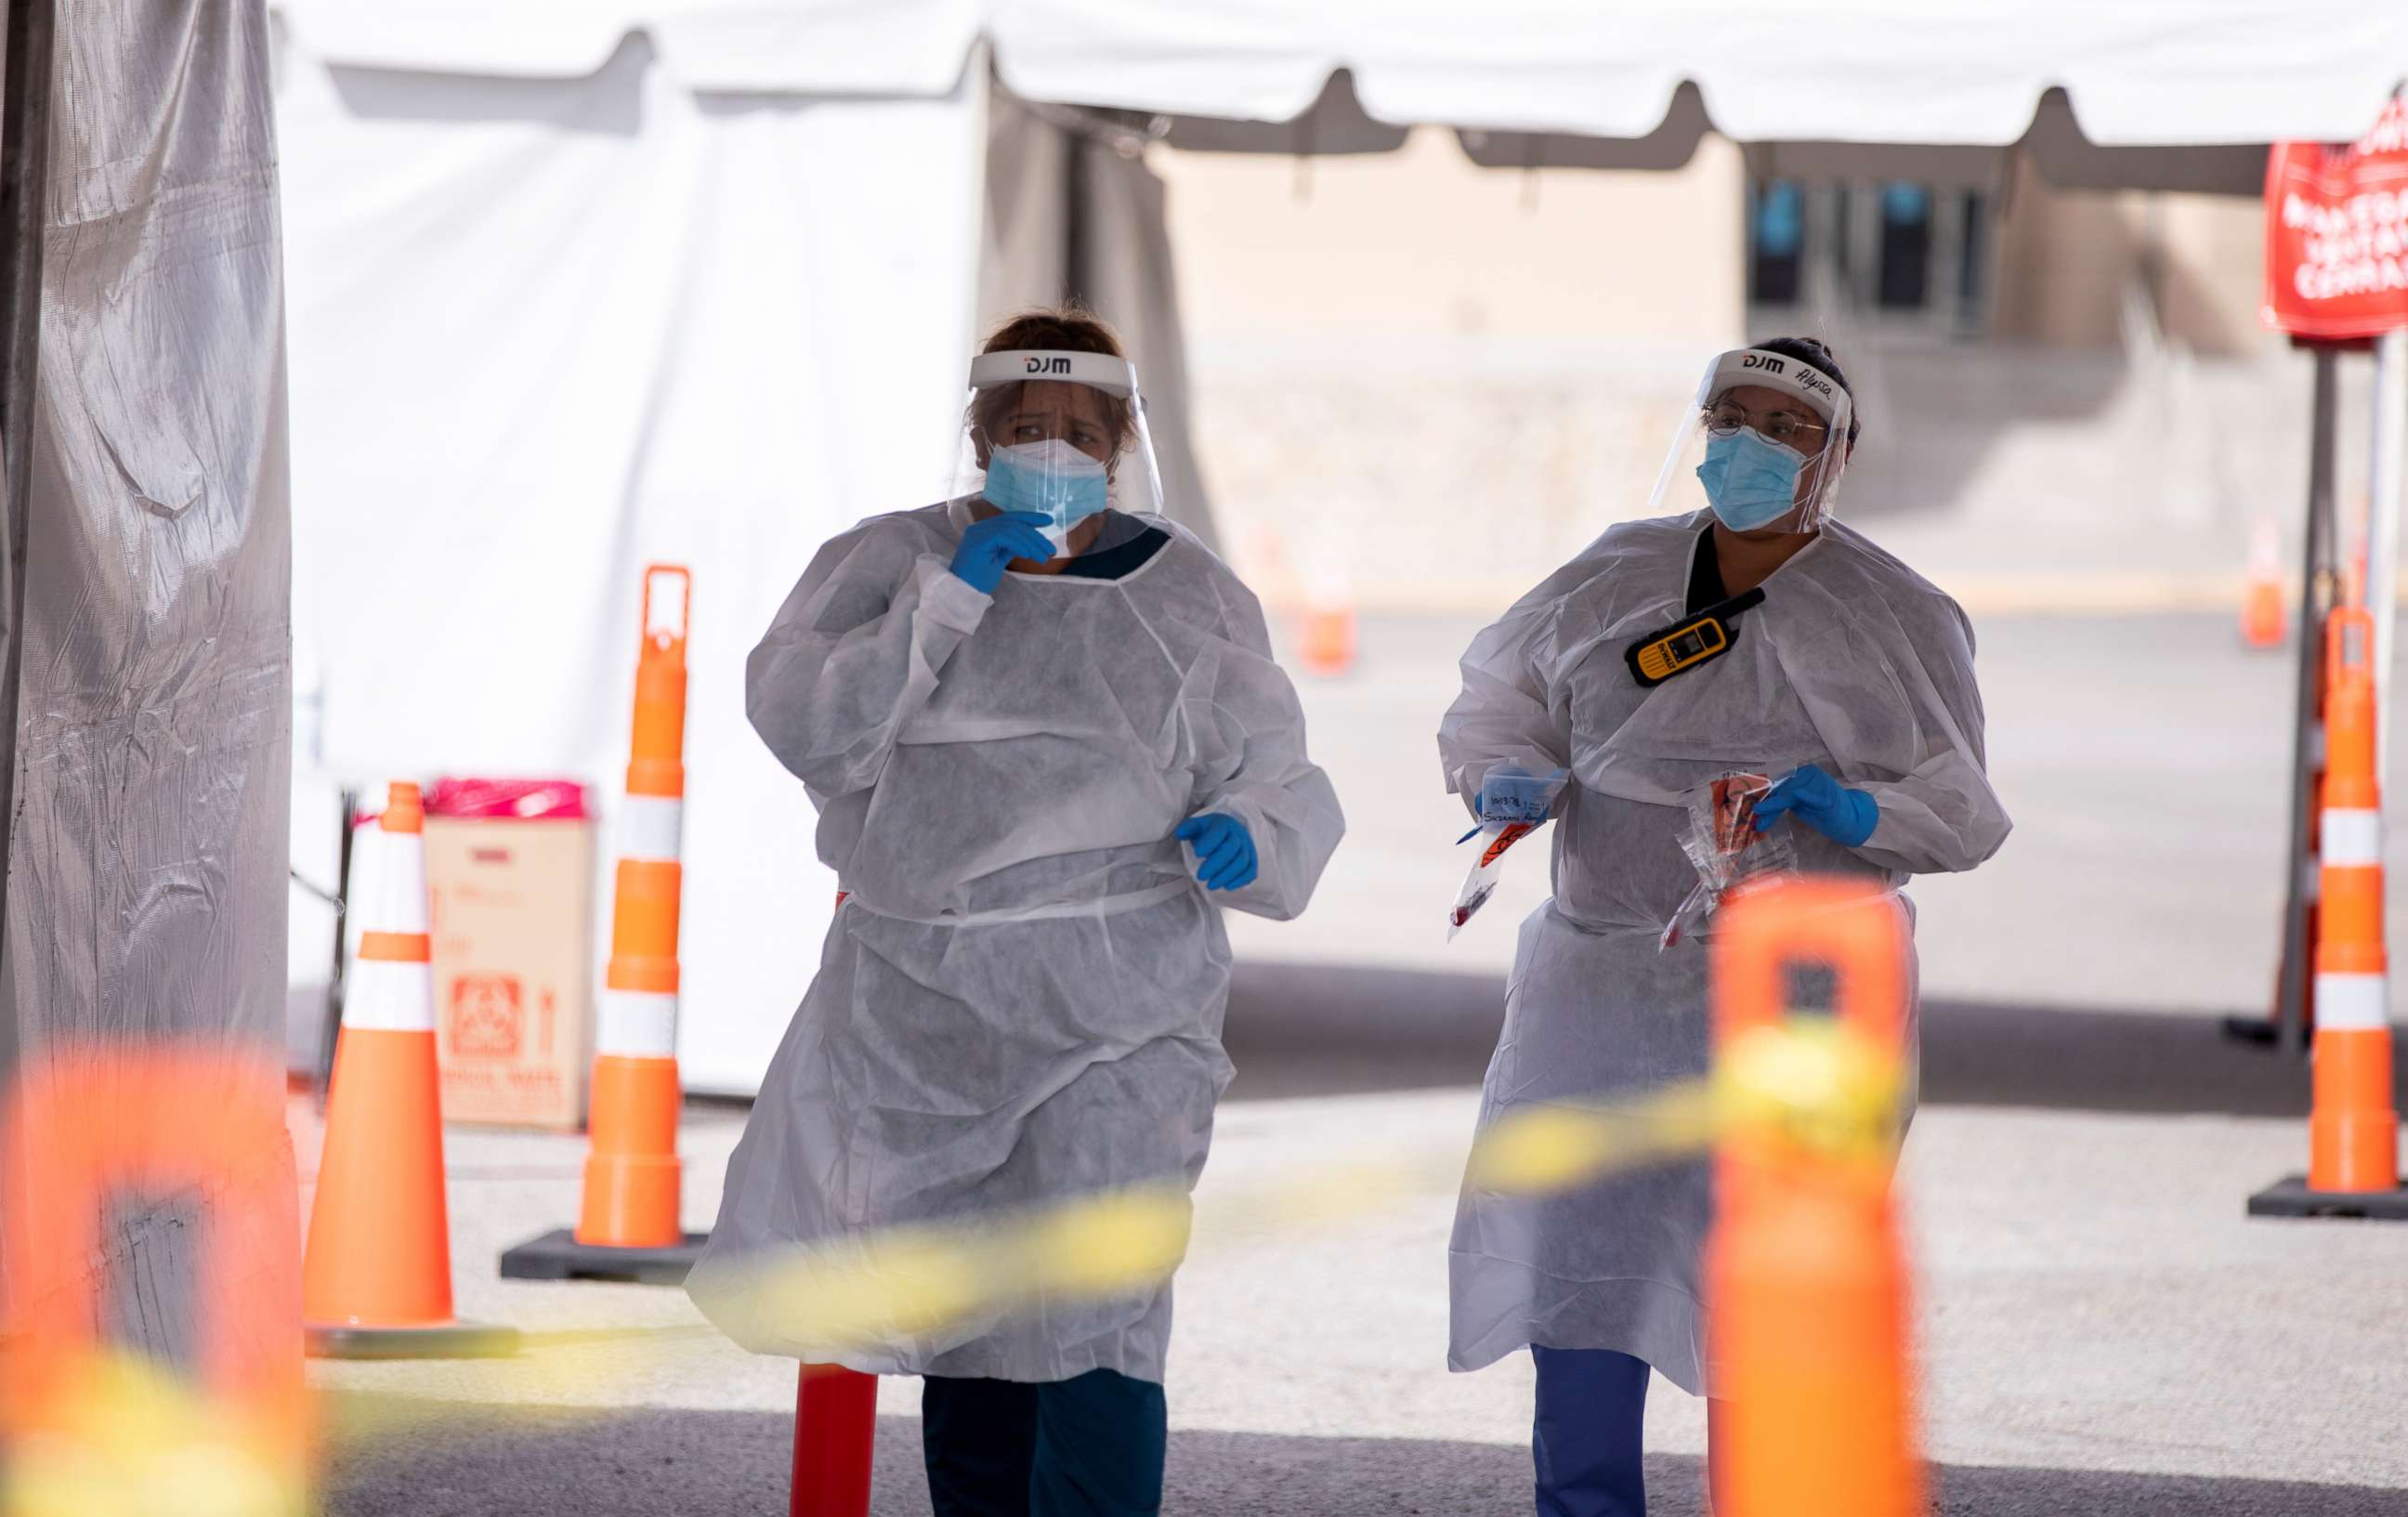 PHOTO: Medical personnel administer free COVID-19 tests at a state run drive-through testing site in the parking lot of the University of Texas, El Paso campus, in El Paso, Texas, U.S., Nov. 23, 2020.